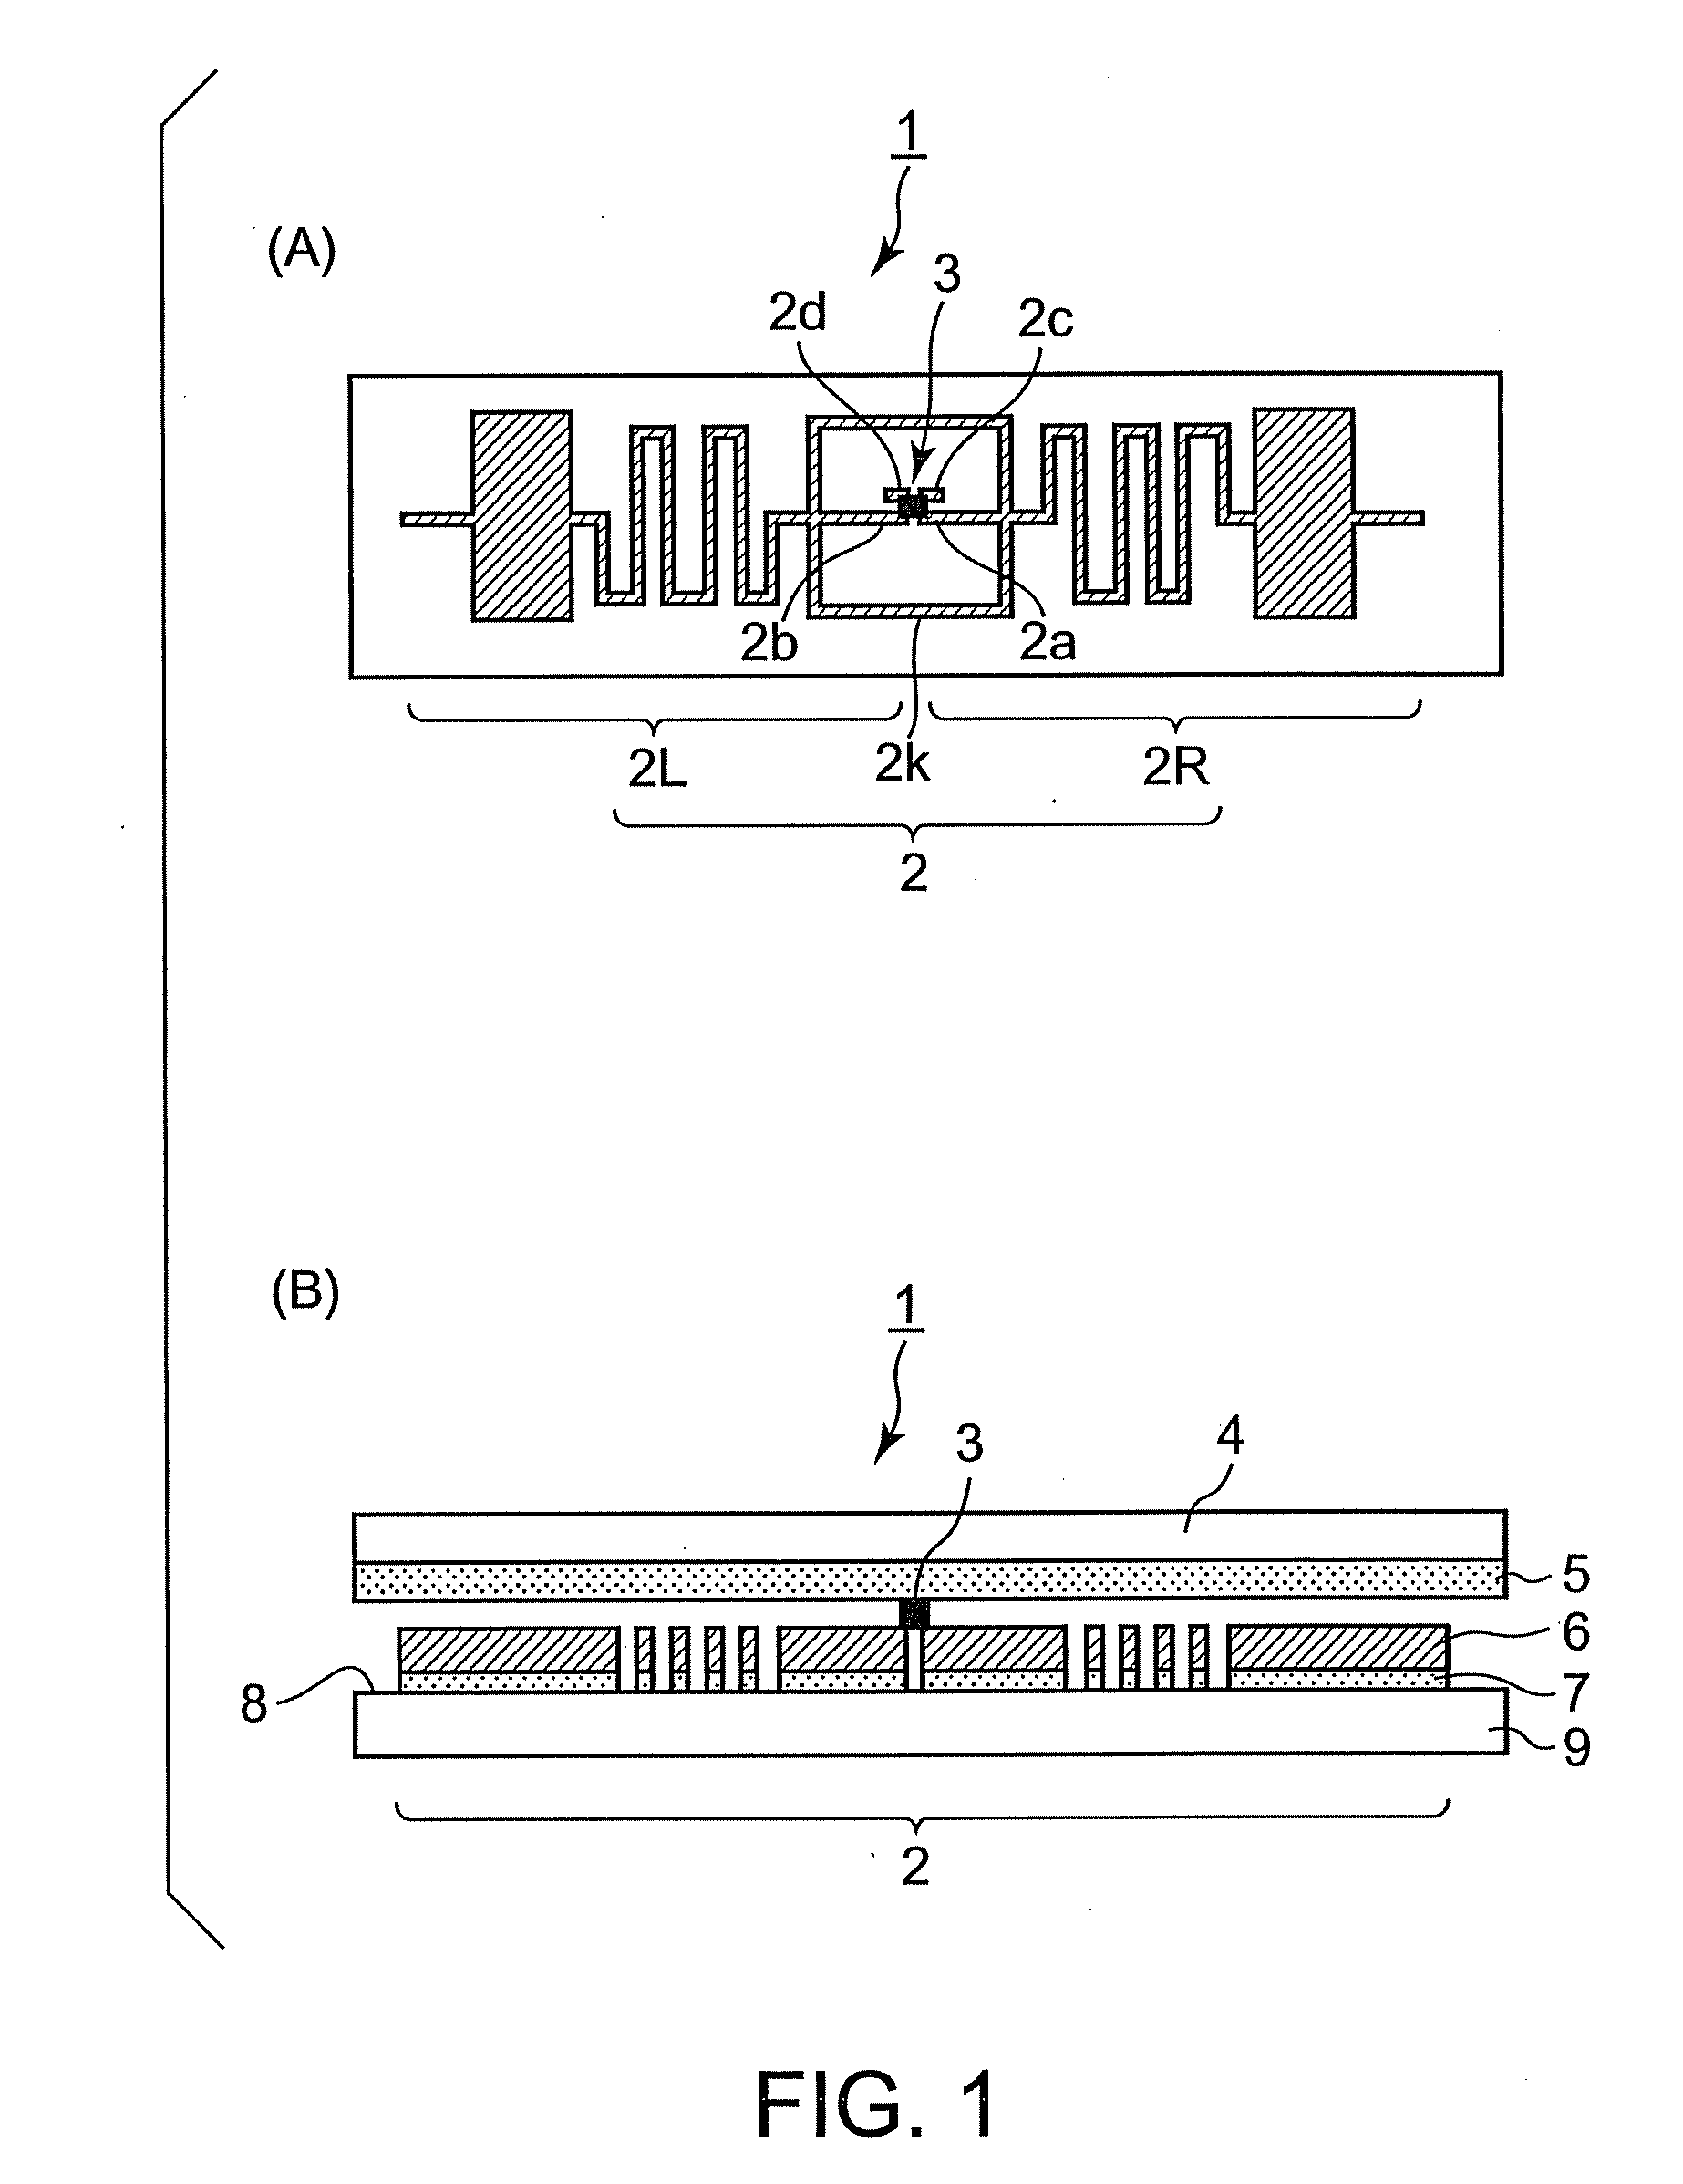 Noncontact IC tag label and method of manufacturing the same